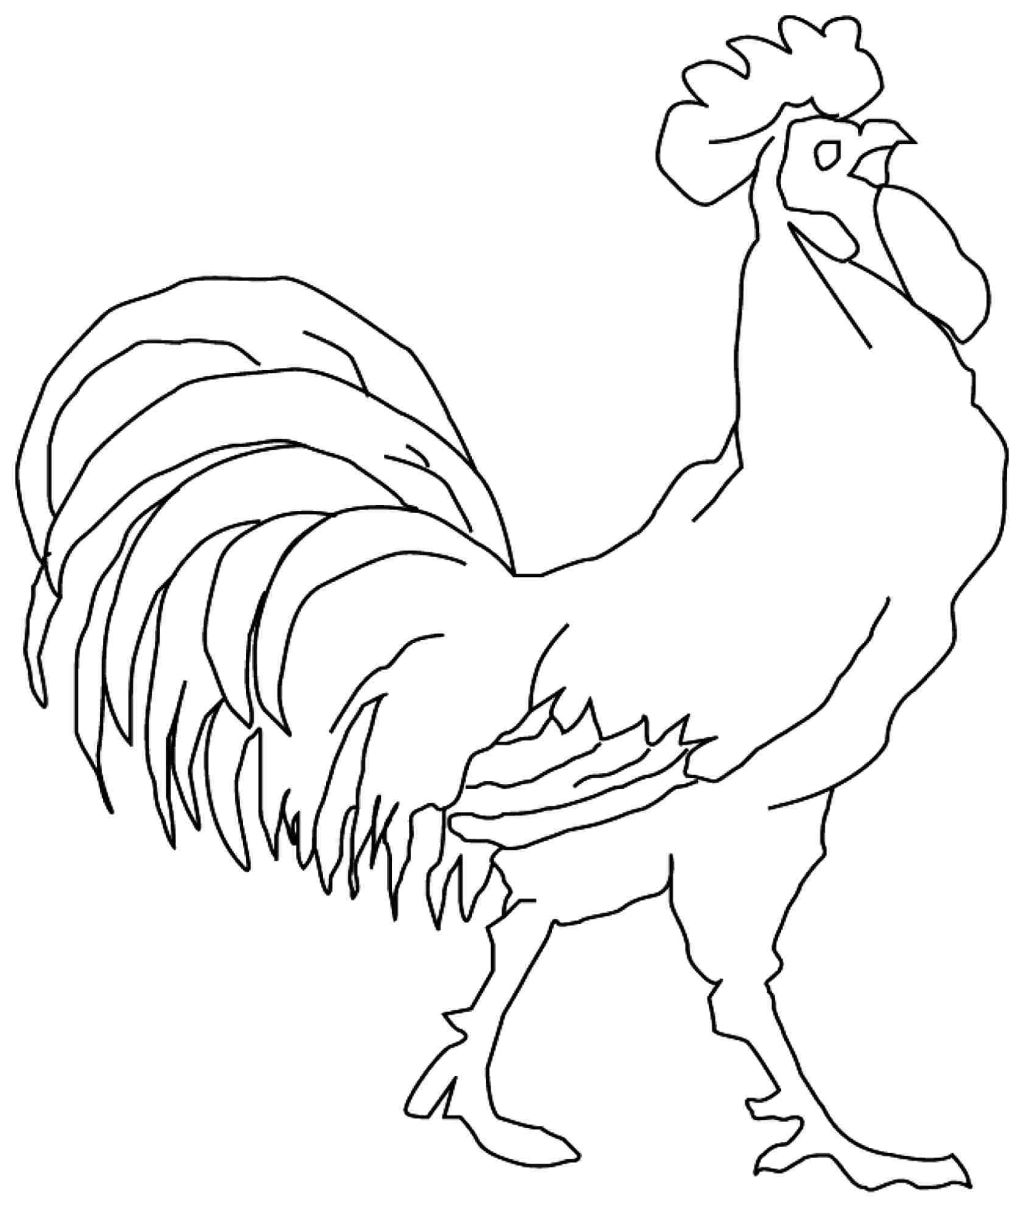 free-rooster-coloring-pages-at-getcolorings-free-printable-colorings-pages-to-print-and-color